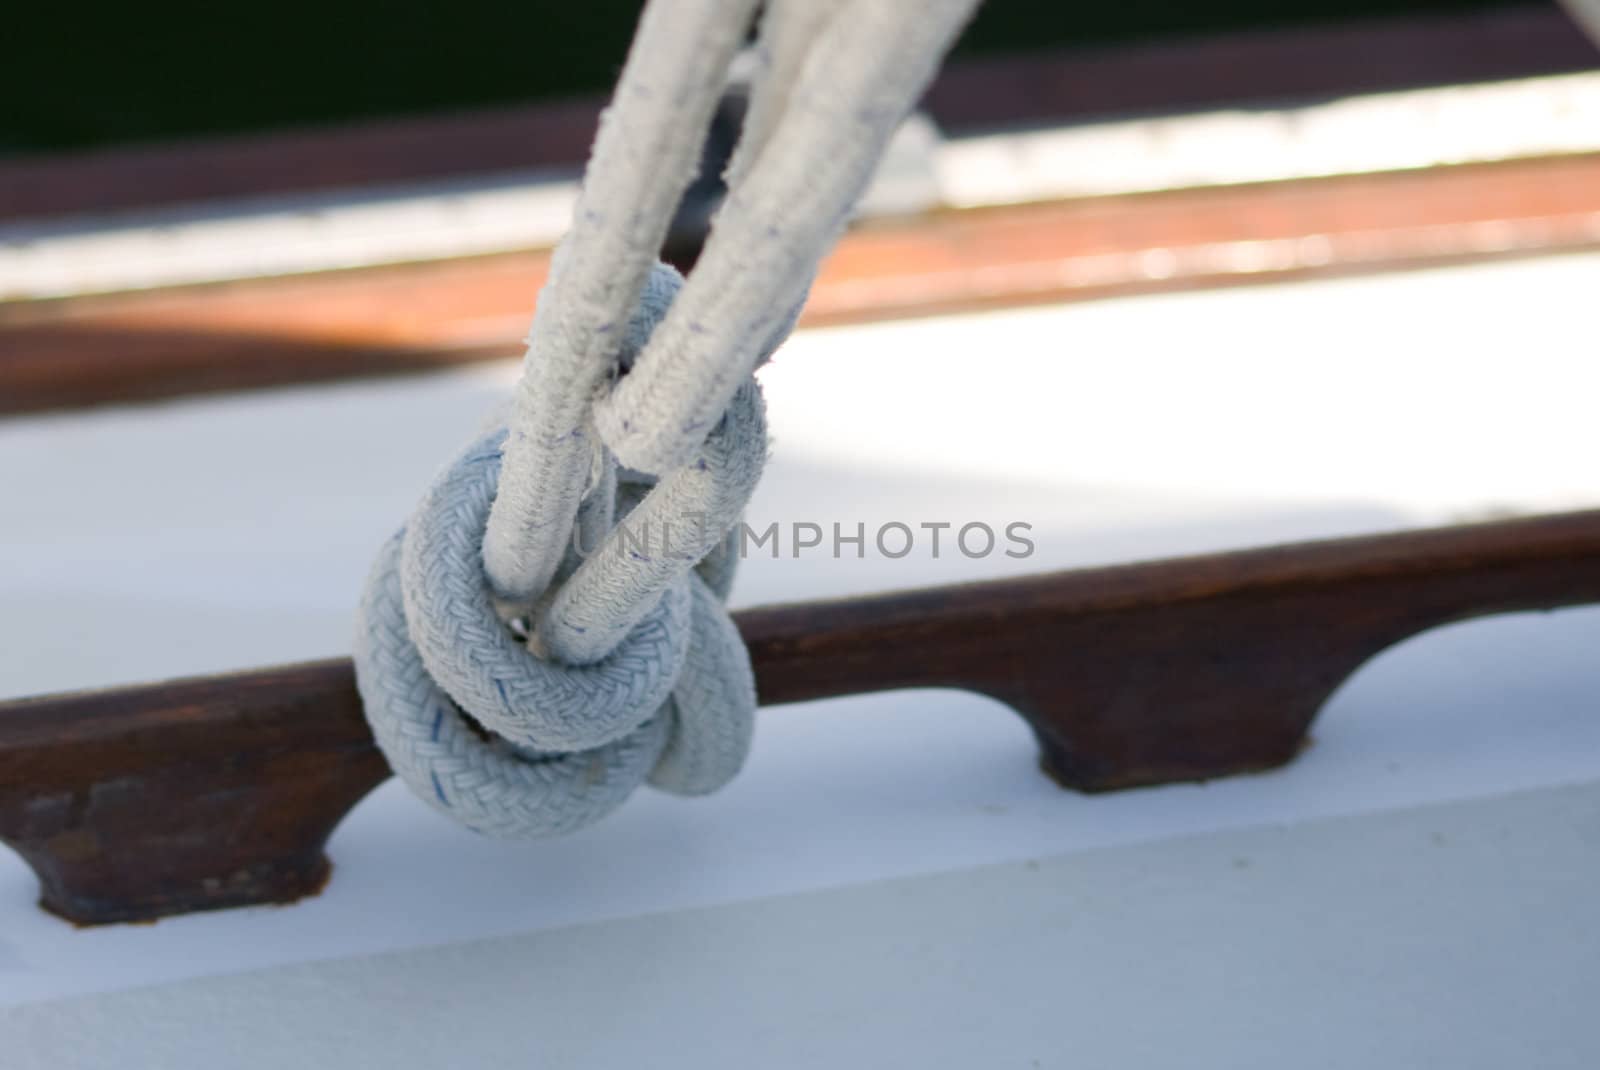 Sailing Knot or Hitch shows sail line tied to a wood rail on a yacht set againt the white hull topside.
